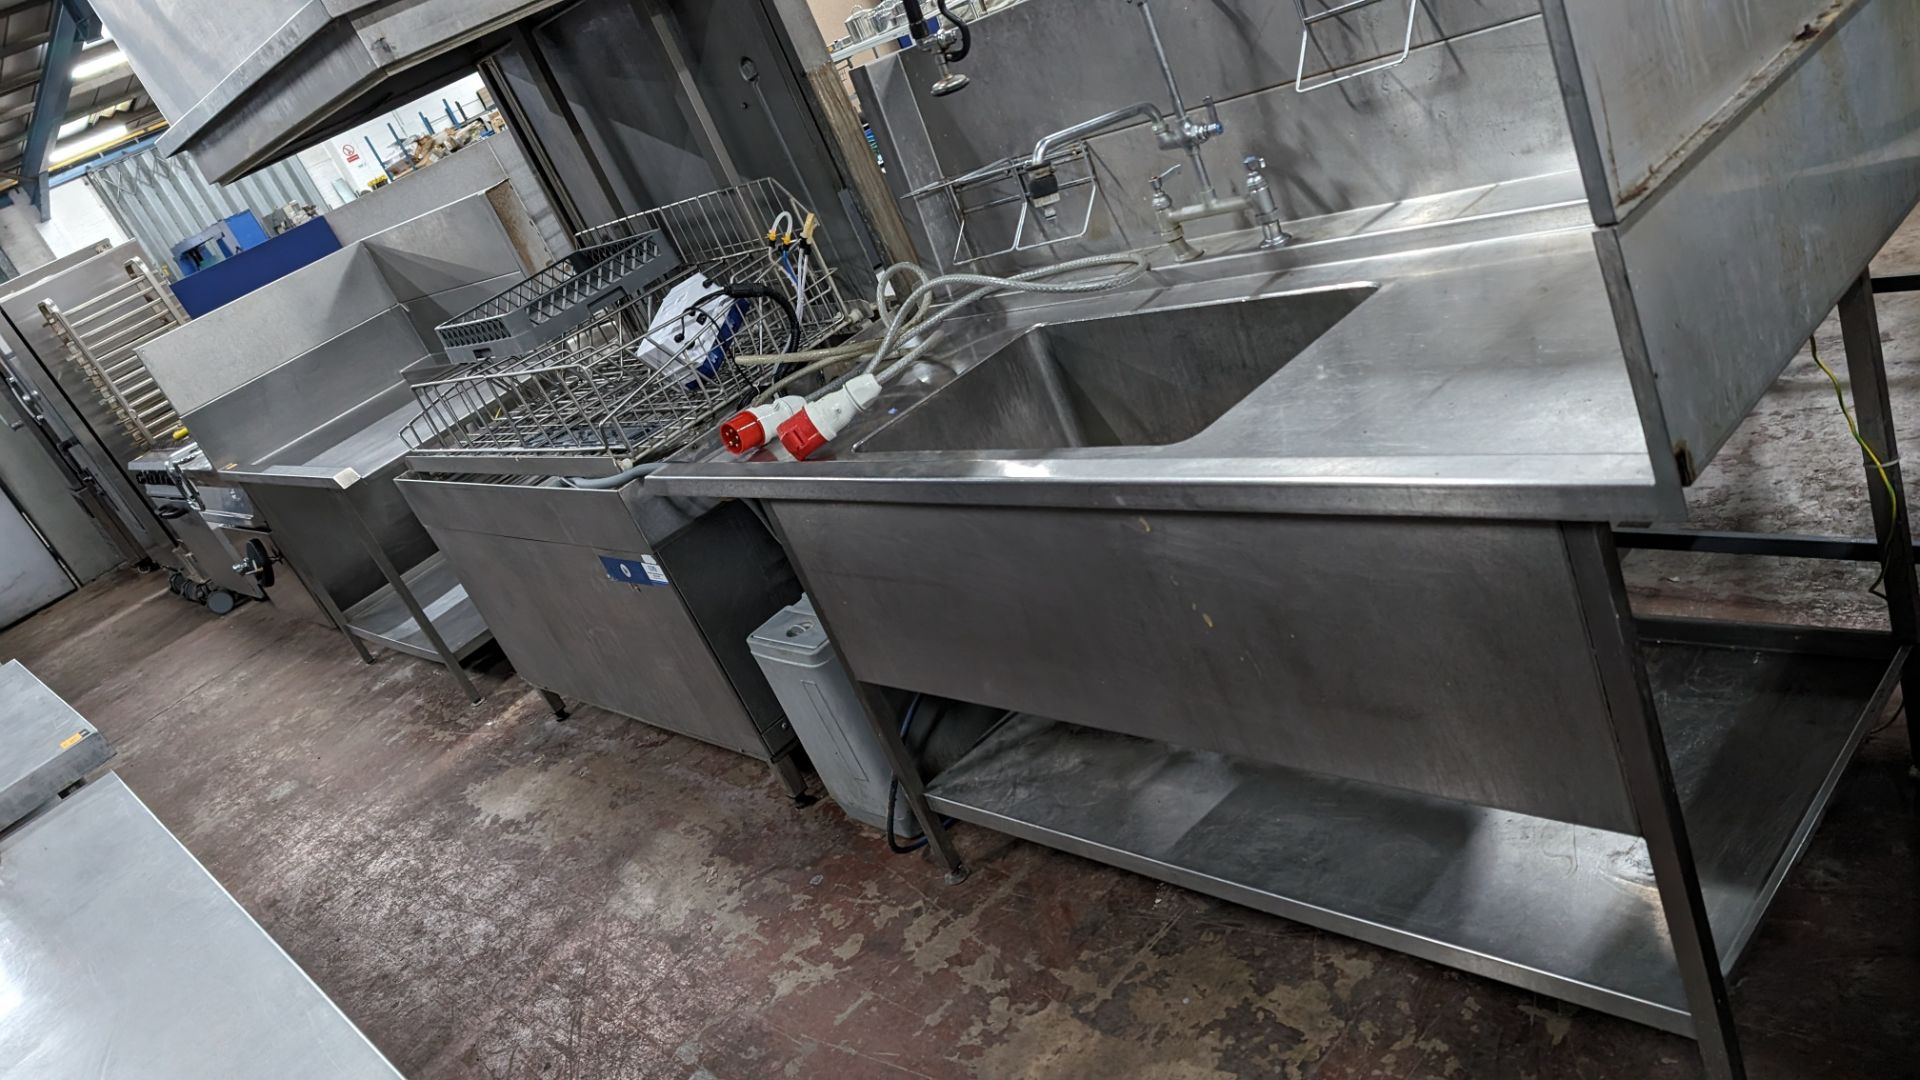 Hobart very large heavy duty commercial pass-through dishwasher including large stainless steel tray - Image 11 of 19